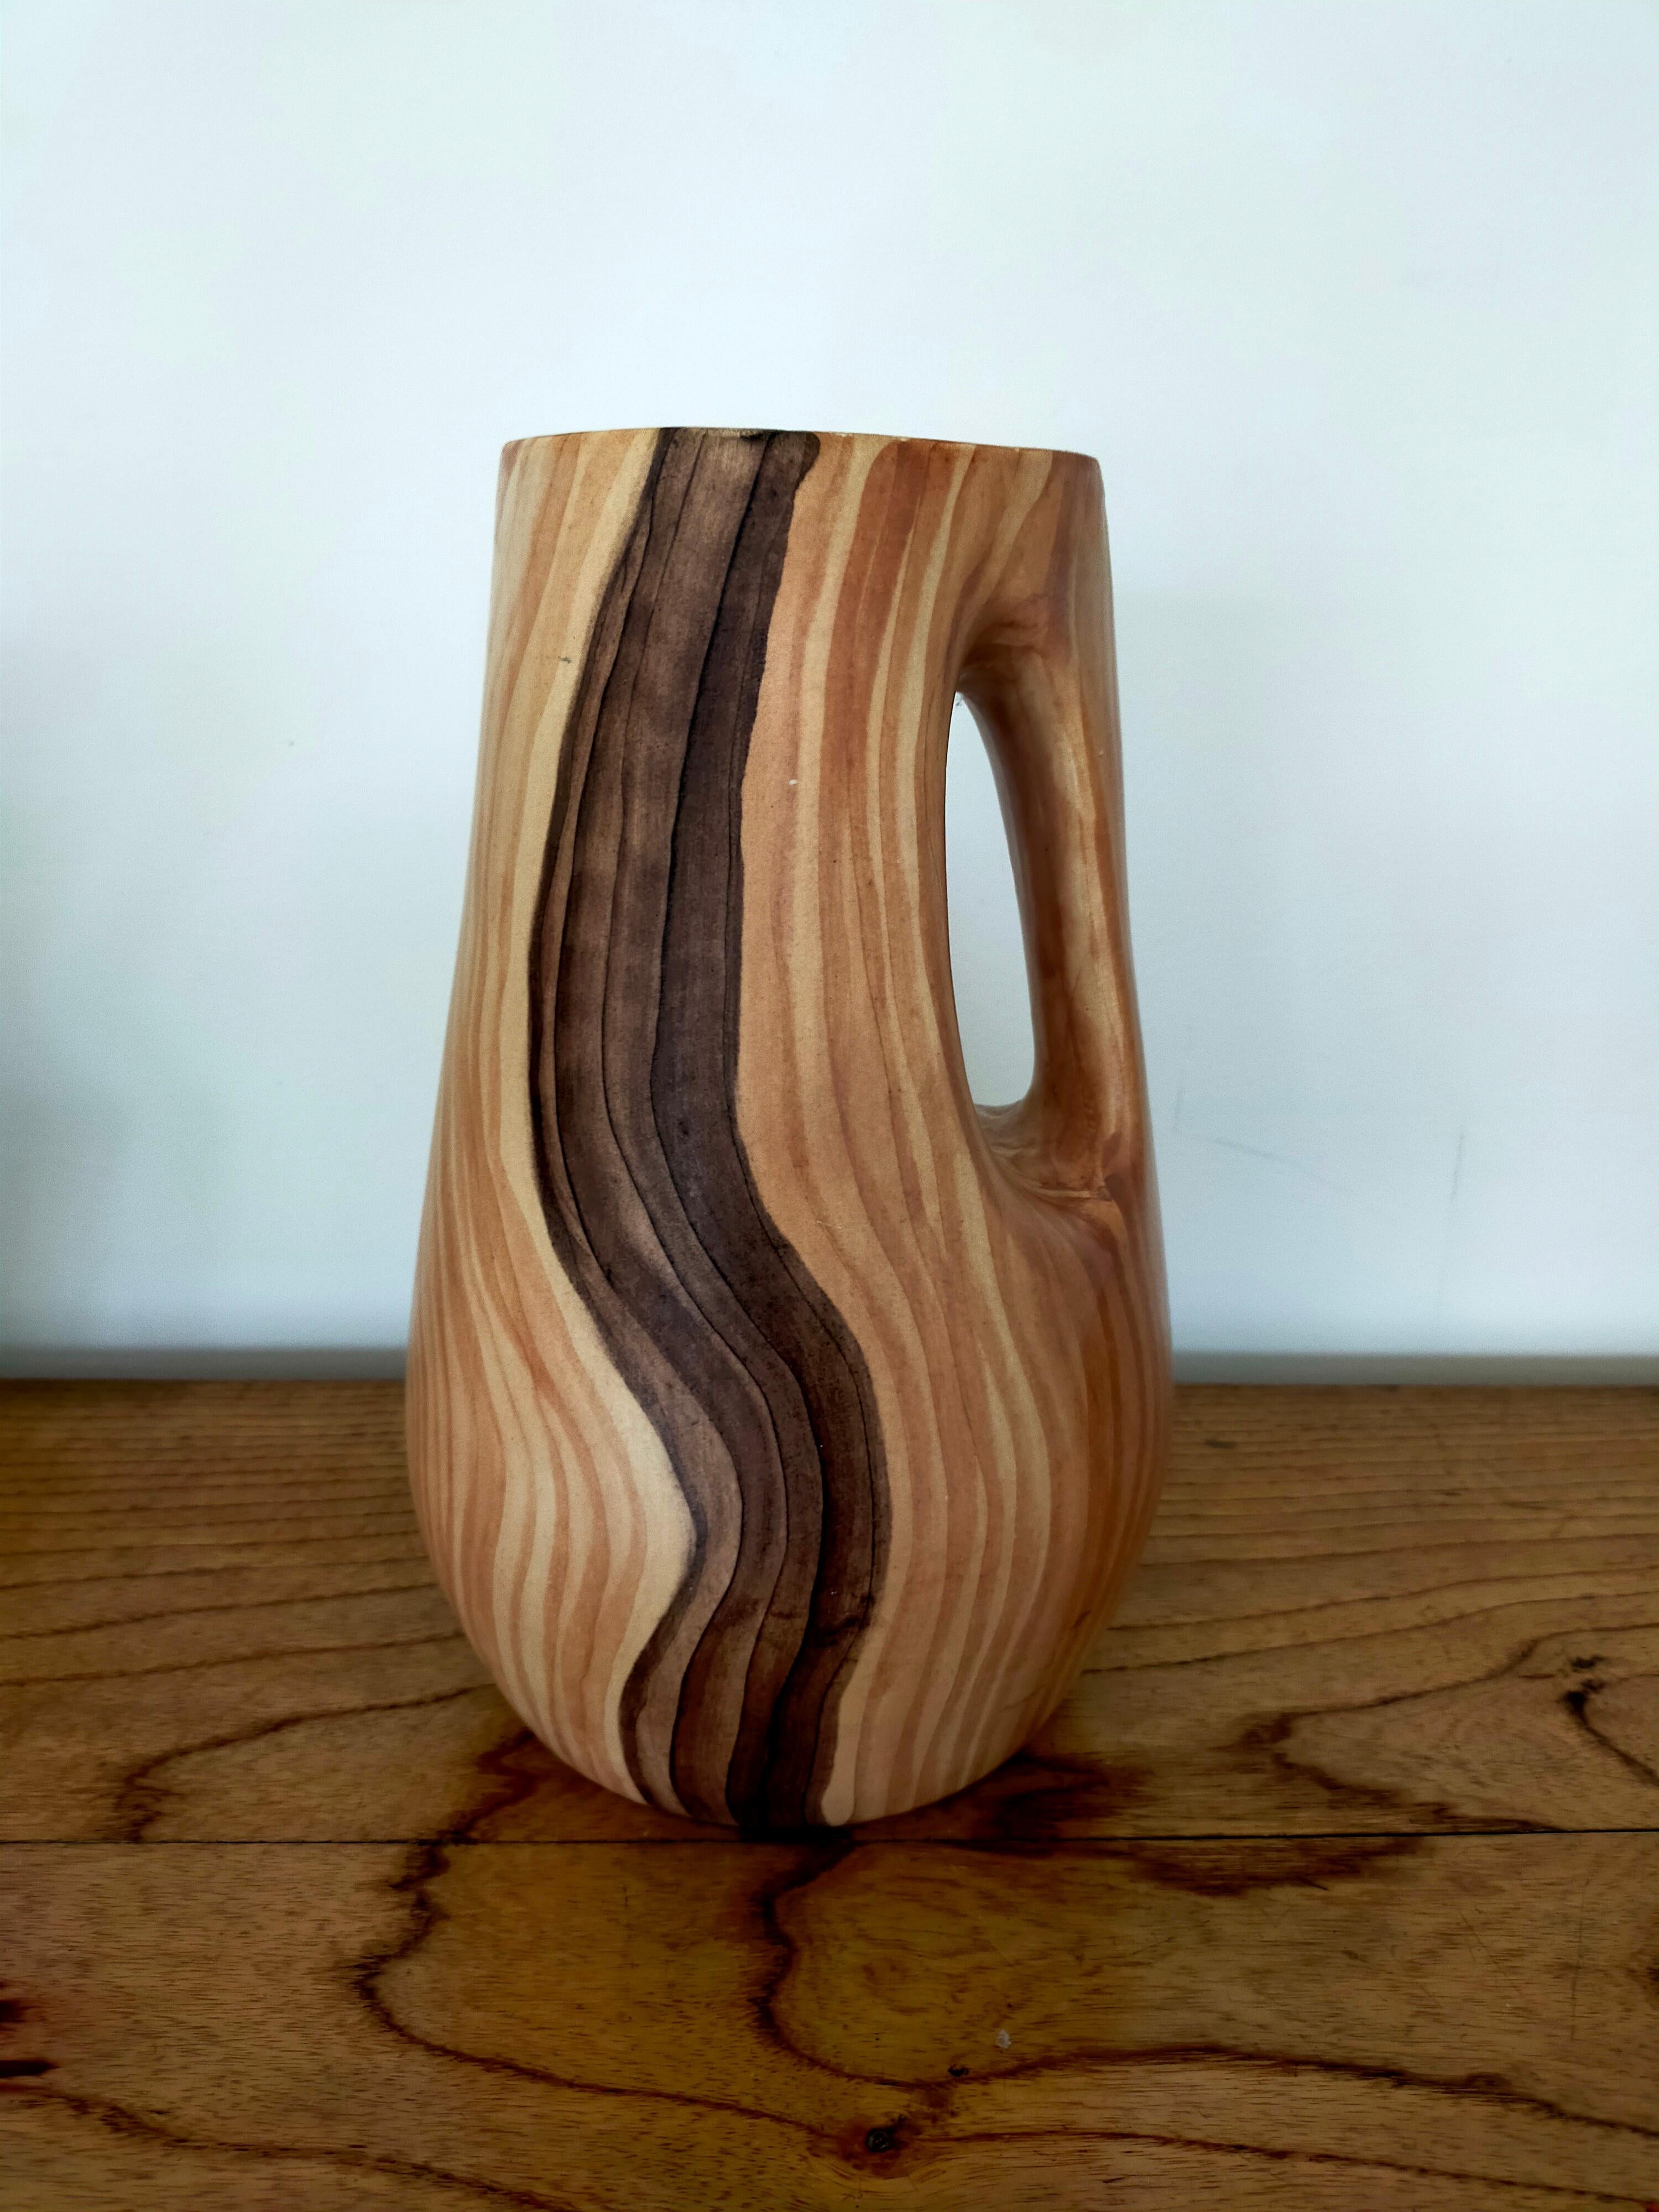 Vase in faux-bois by Grandjean Jourdan in Vallauris.
Vase with handle, typical of the work of the 50s, 60s.
Great quality, 25 cm high